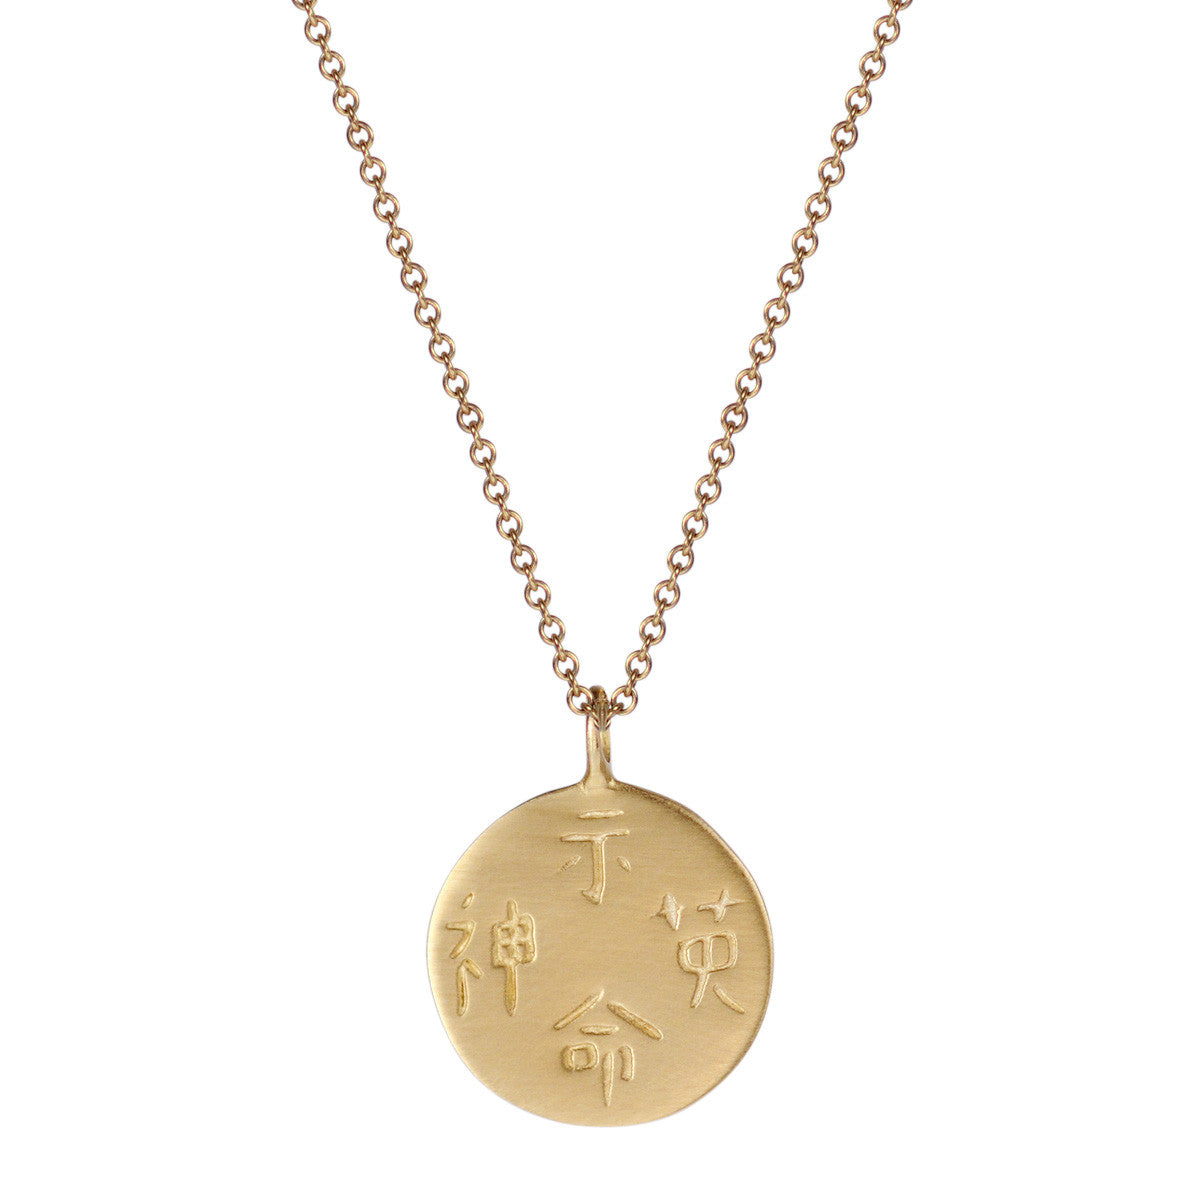 10K Gold 4 Character Chinese Pendant